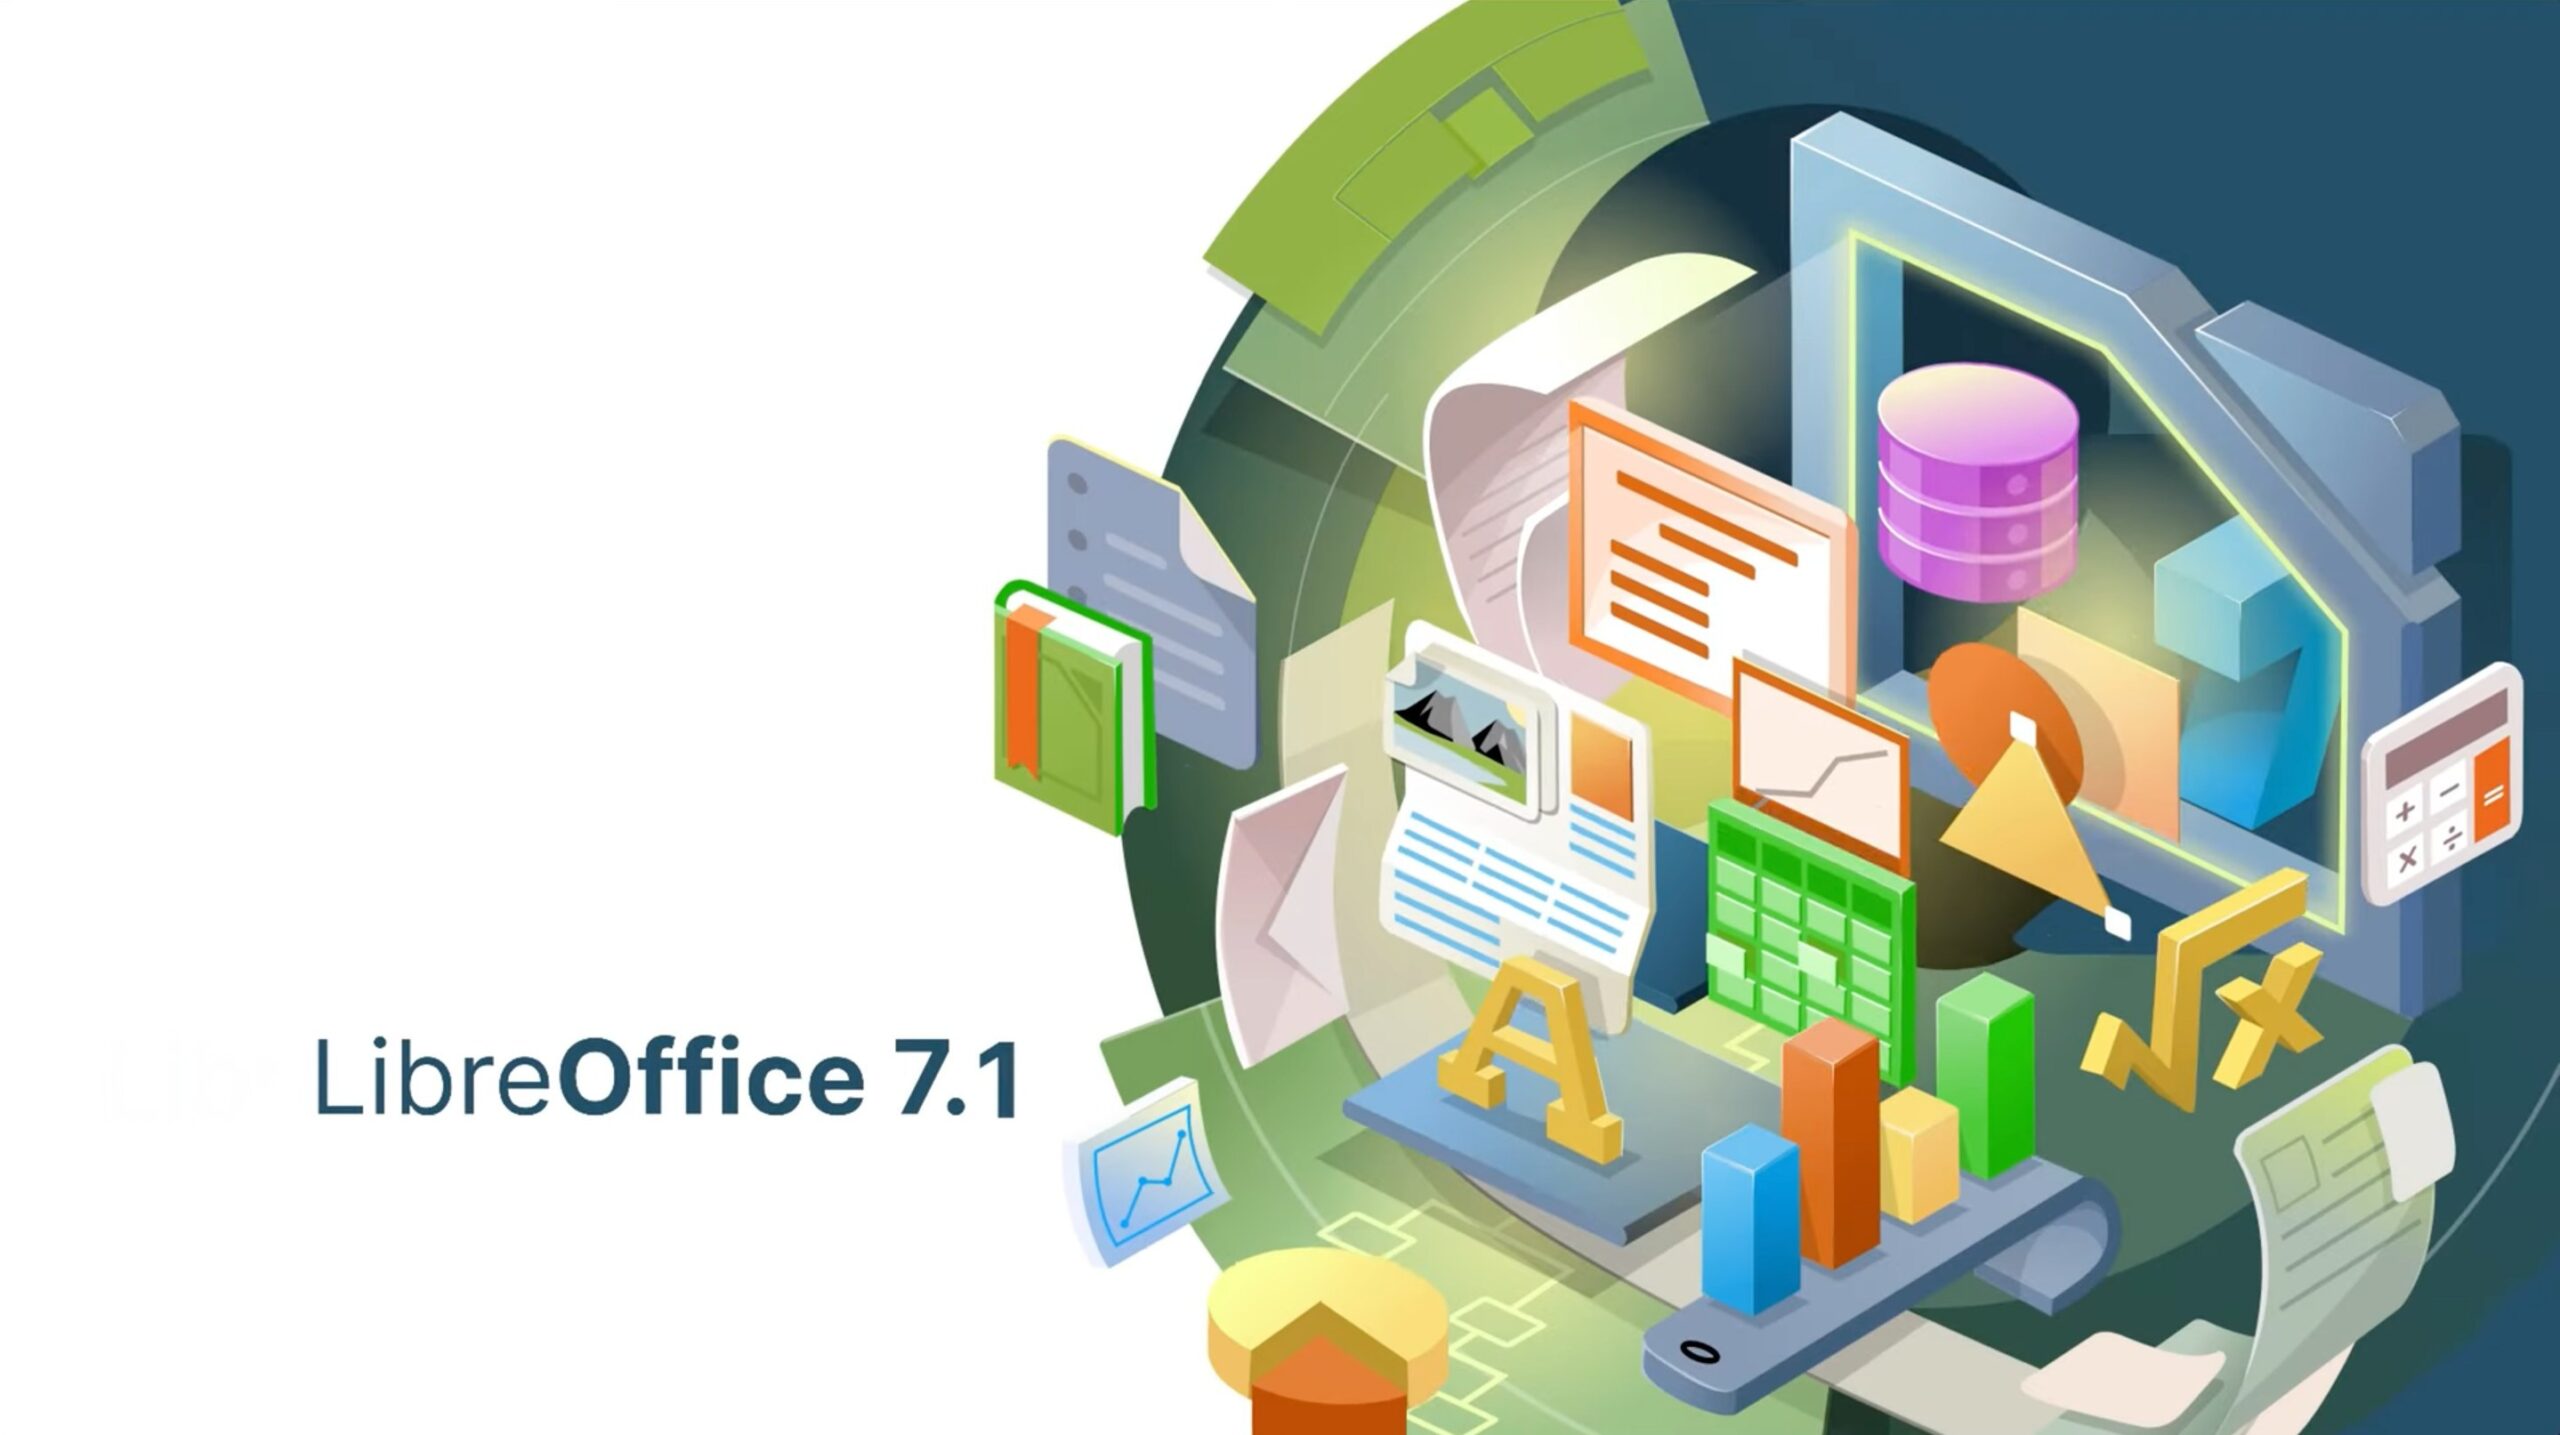 LibreOffice 7.1.2 Office Suite Released with More Than 60 Bug Fixes